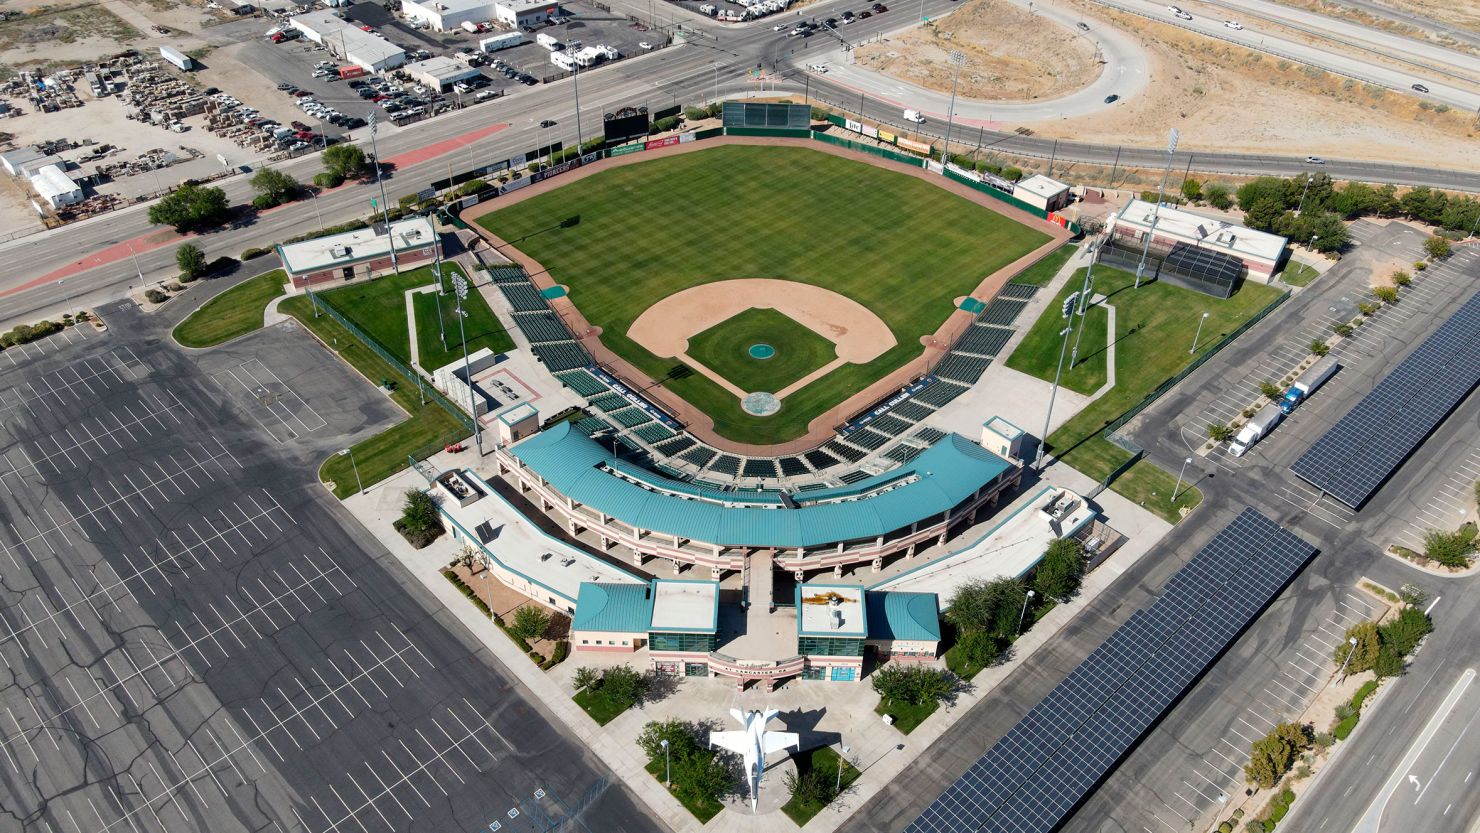 The Lancaster Municipal Stadium is the home of the Lancaster JetHawks of the California League, the Class A-Advanced minor league baseball affiliate of the Colorado Rockies. MLB has informed Minor League Baseball that its affiliated Minor League teams will not be provided with players in 2020.